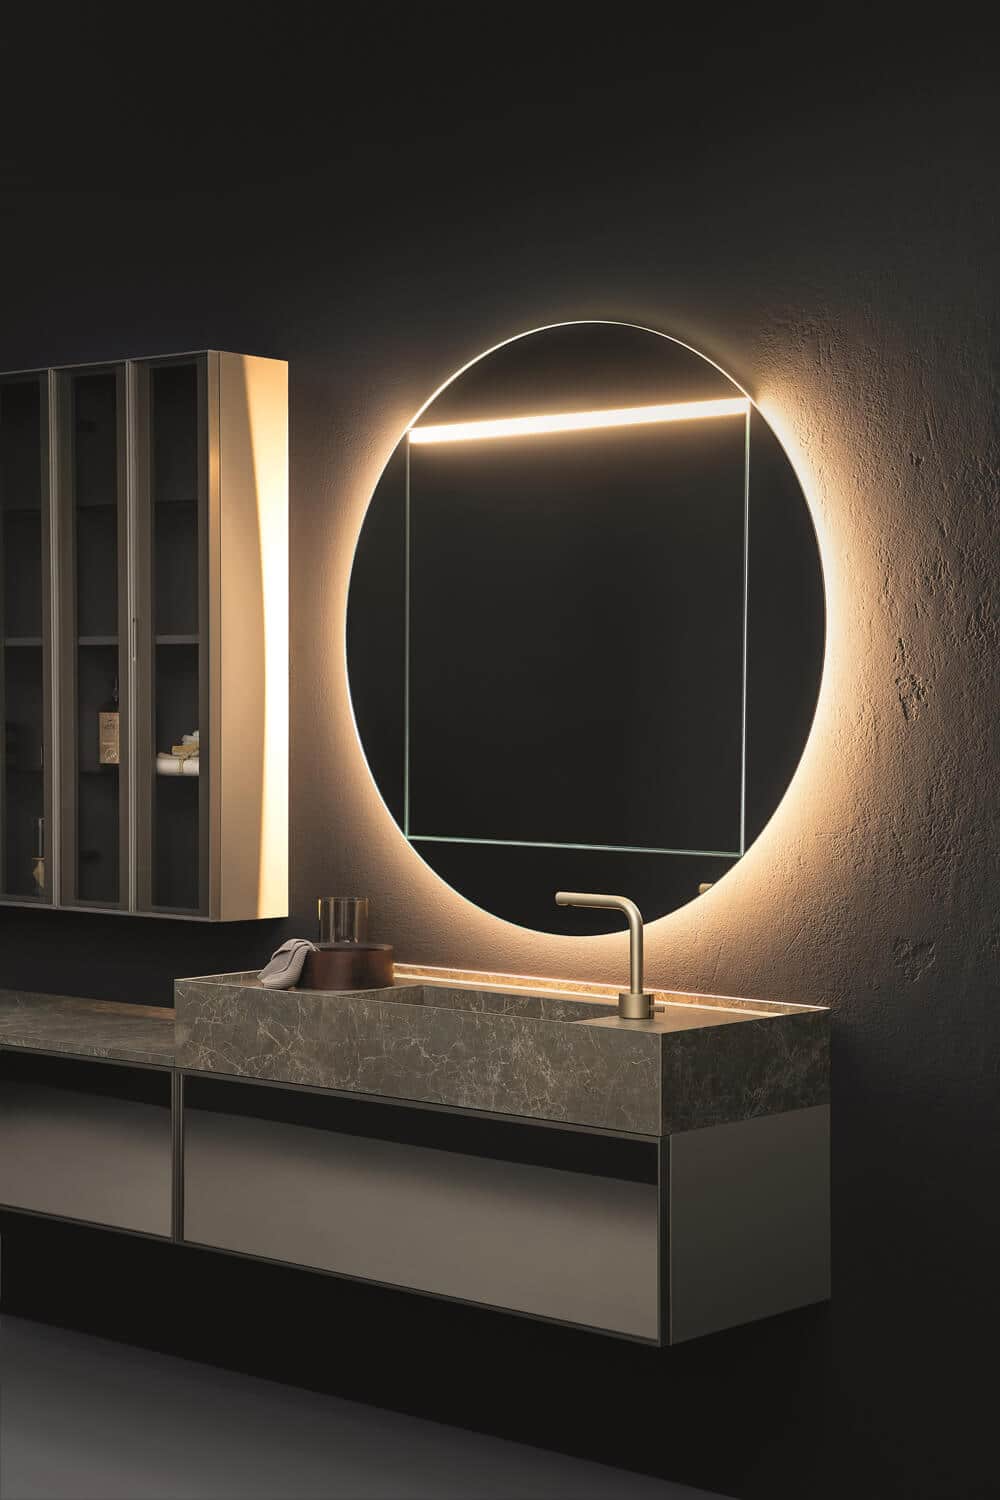 Backlit mirrors of different shapes complete the Quari designs with their luxurious feel.